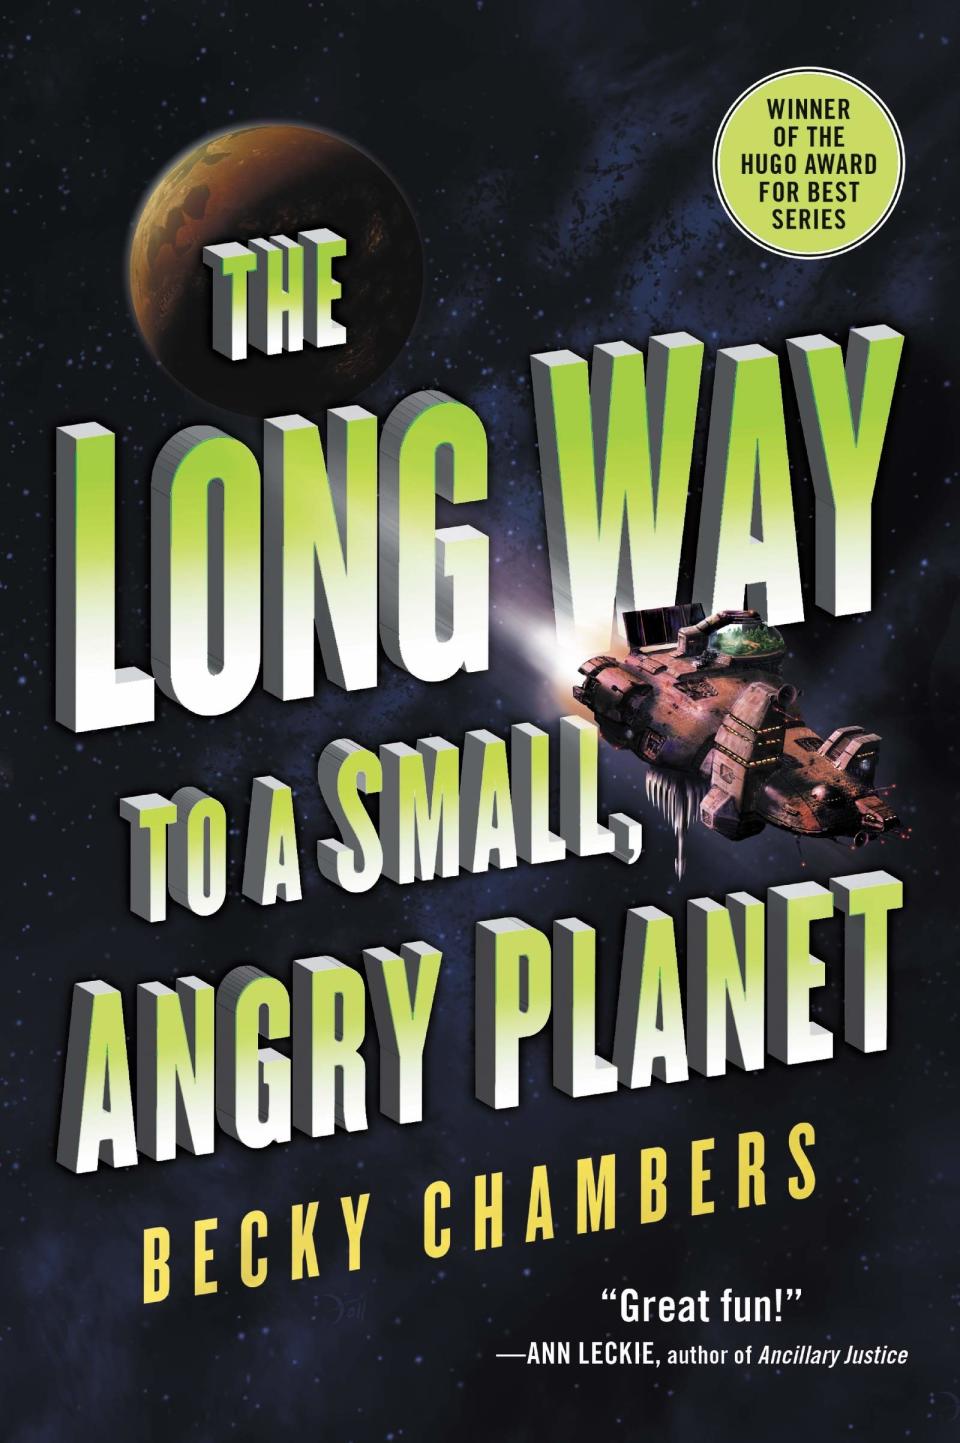 When Rosemary joins the crew of the aging Wayfarer, she doesn't expect much beyond a job and a ride far away from her past. But the eccentric crew members (including a reptilian pilot) turn out to be exactly what loner Rosemary needs in her life. When they're offered the job of a lifetime, they agree, but a dangerous mission means Rosemary will have to learn to rely on her newfound family. This fun jaunt across space has a cast of delightful characters you'll fall in love with! —Kirby Beaton